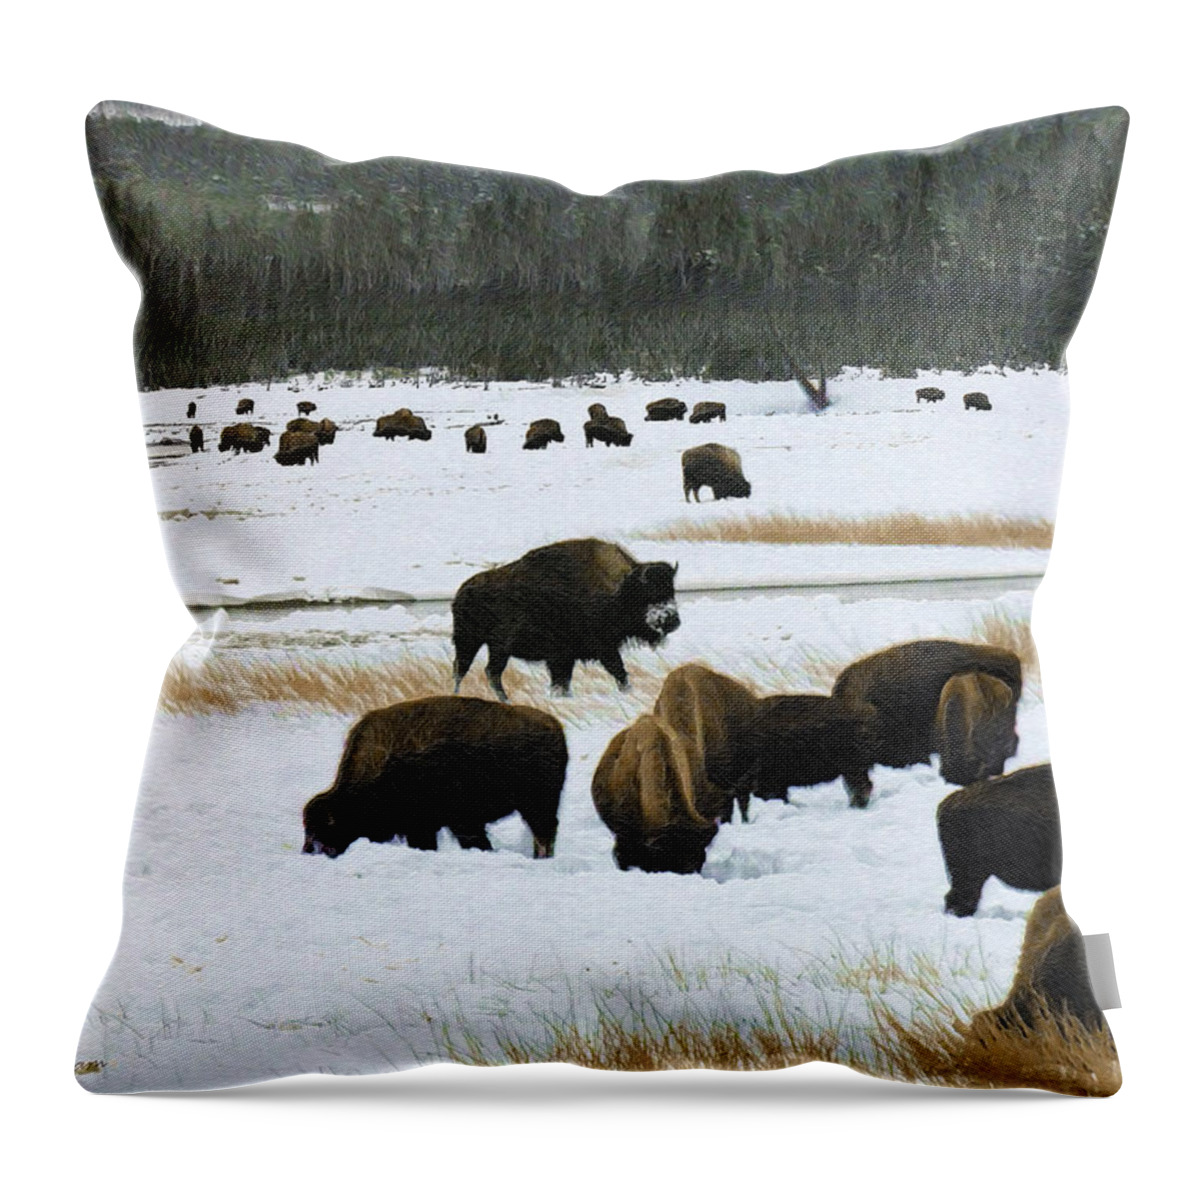 Wild Bison Throw Pillow featuring the mixed media Bison Cows Browsing by Kae Cheatham